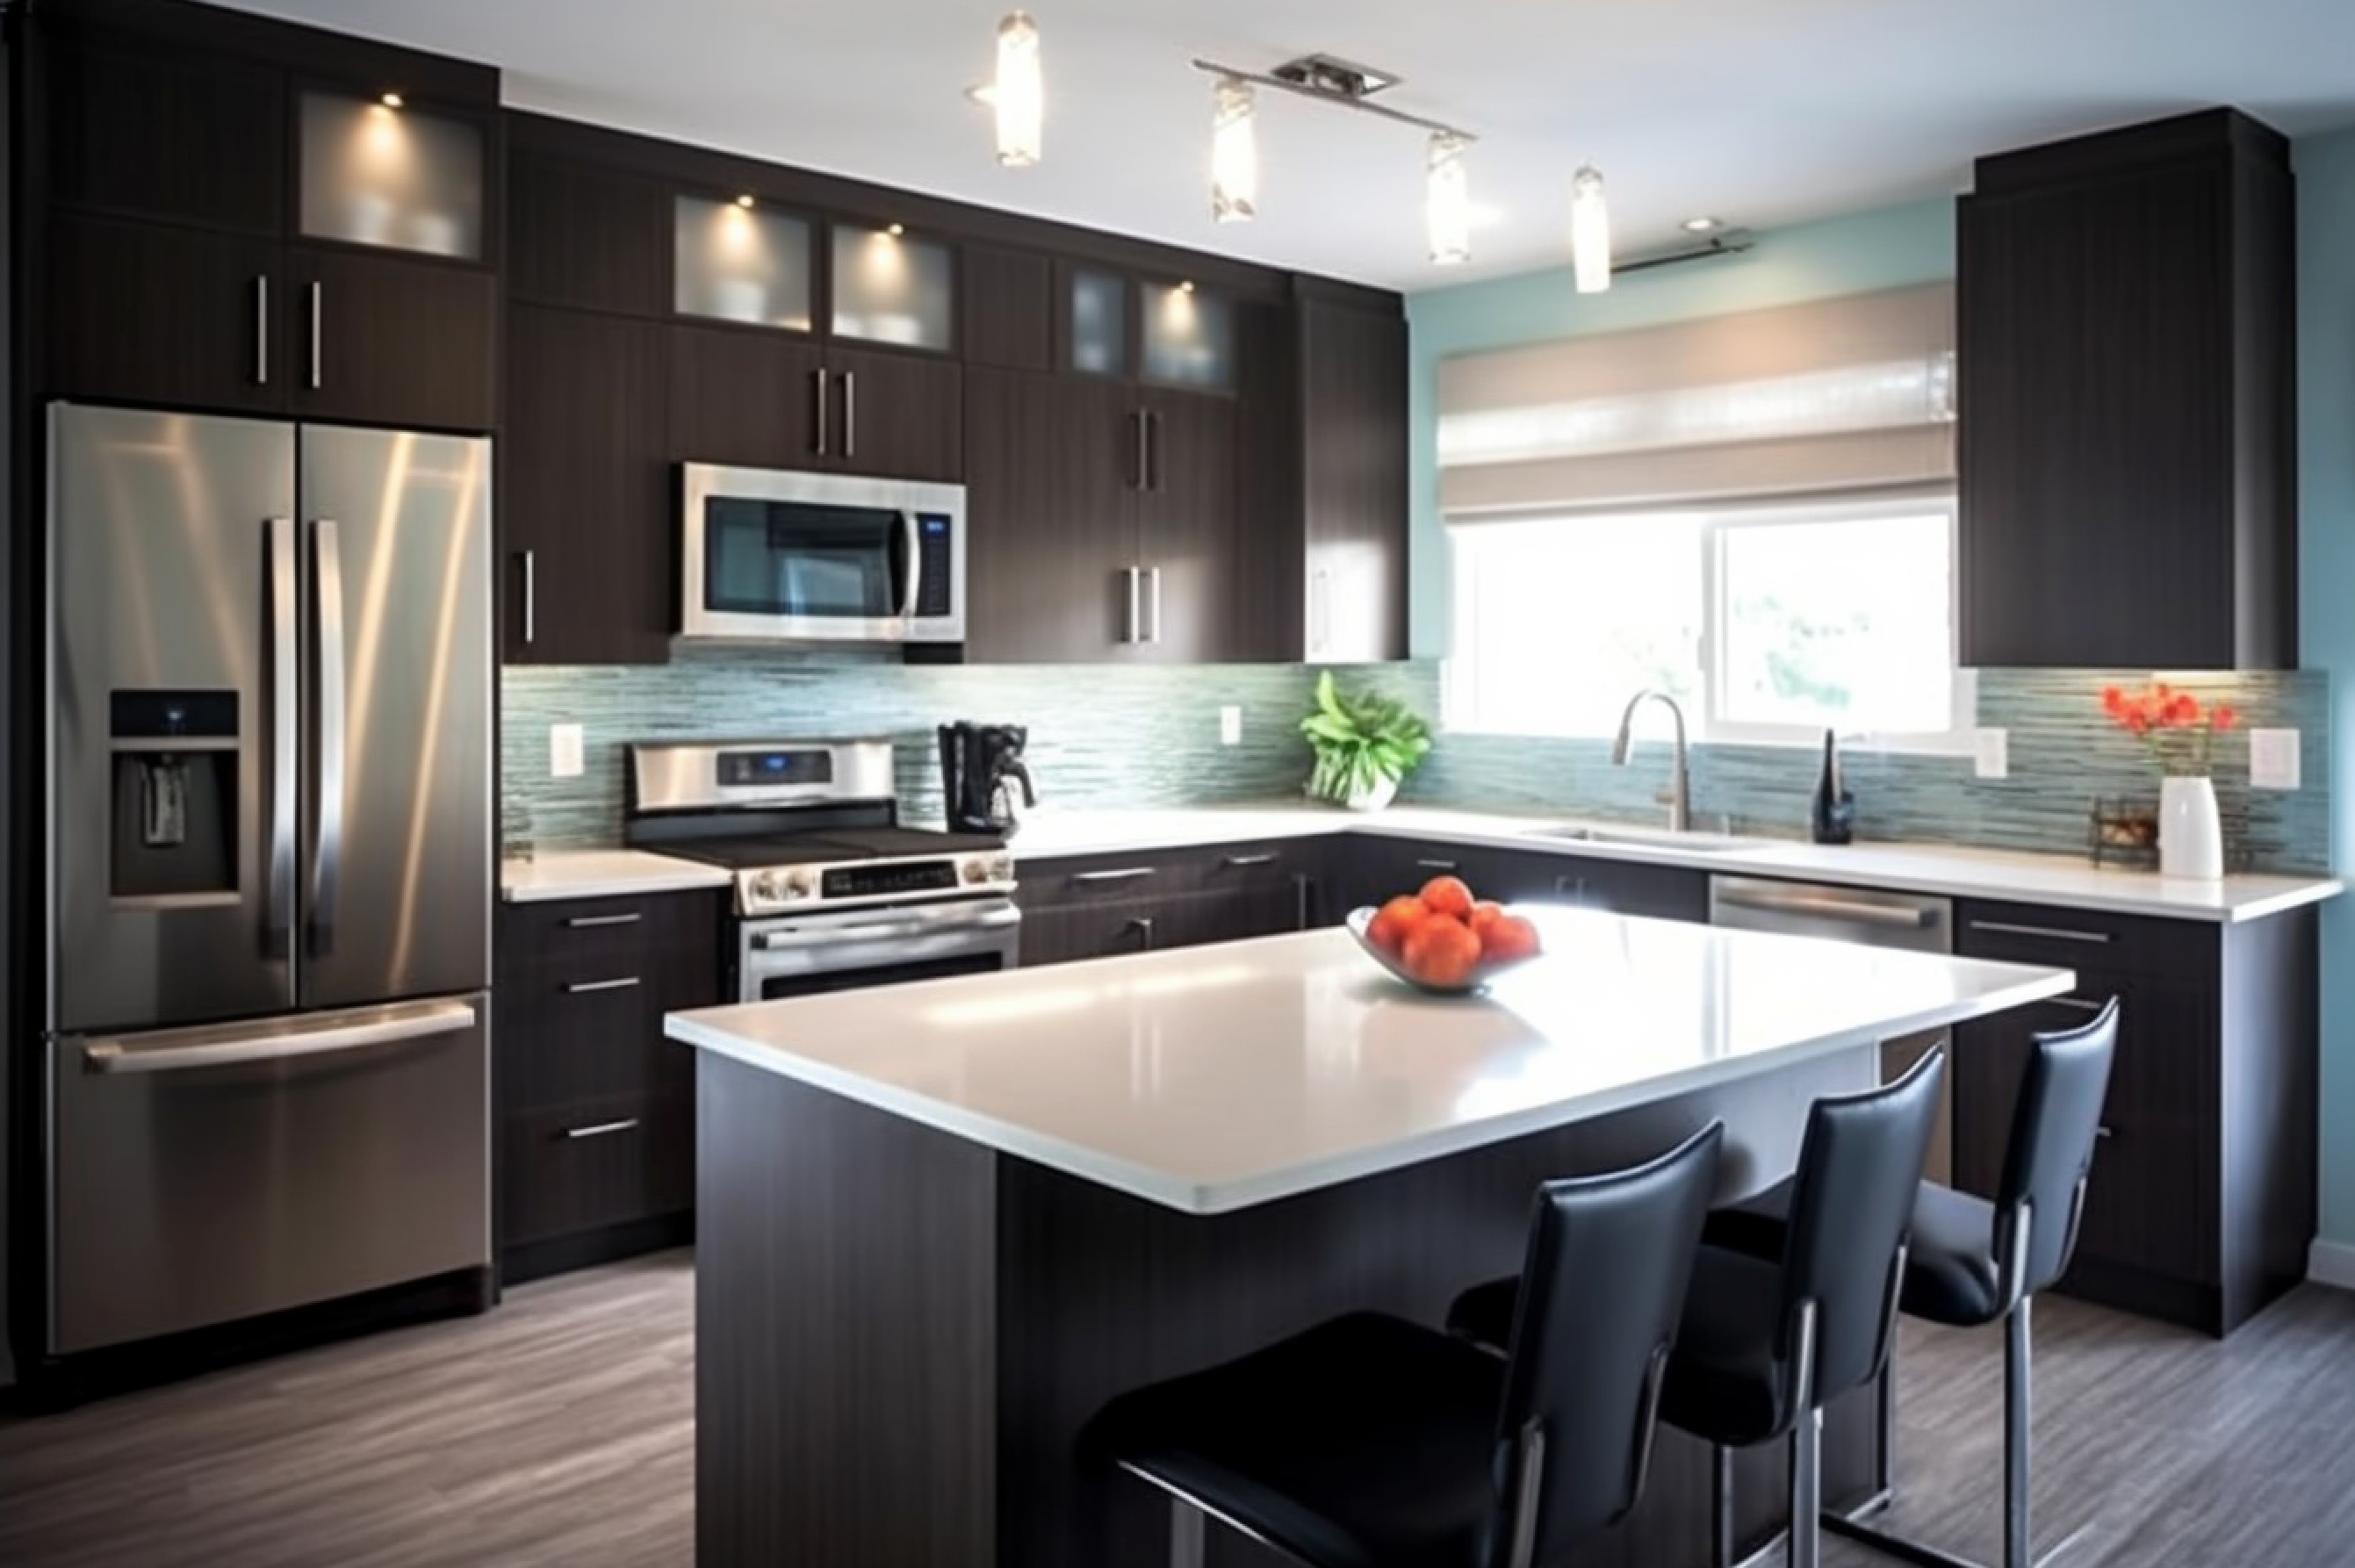 Image displaying a contemporary kitchen with espresso dark brown cabinets and pearl grey backsplash and countertops.